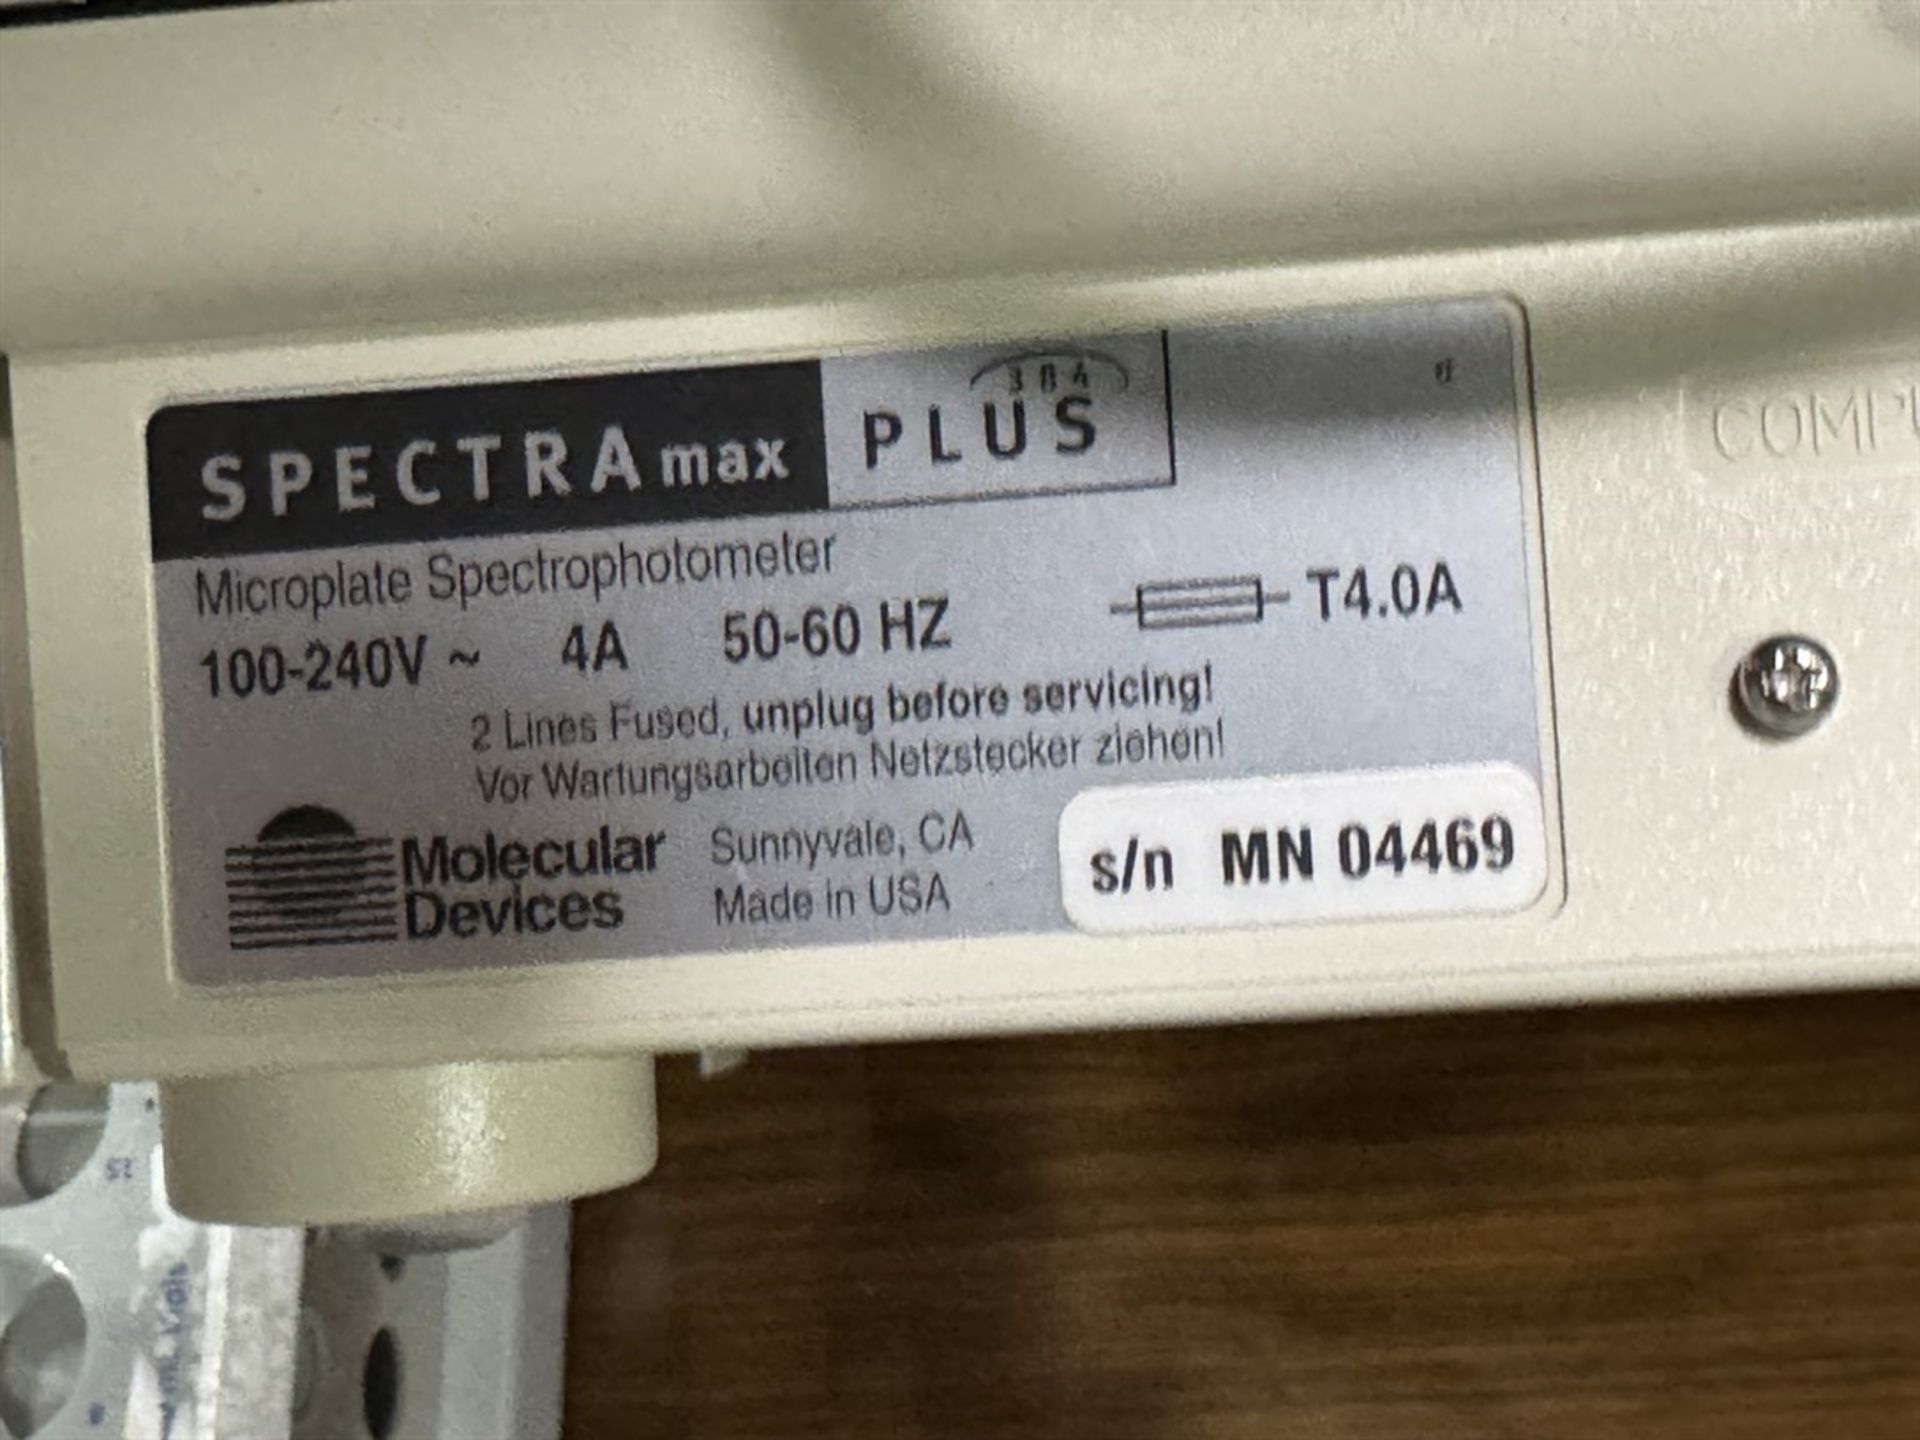 MOLECULAR DEVICES Spectra Max 384 Plus Microplate Spectrophotometer, s/n MN04469 - Image 4 of 4